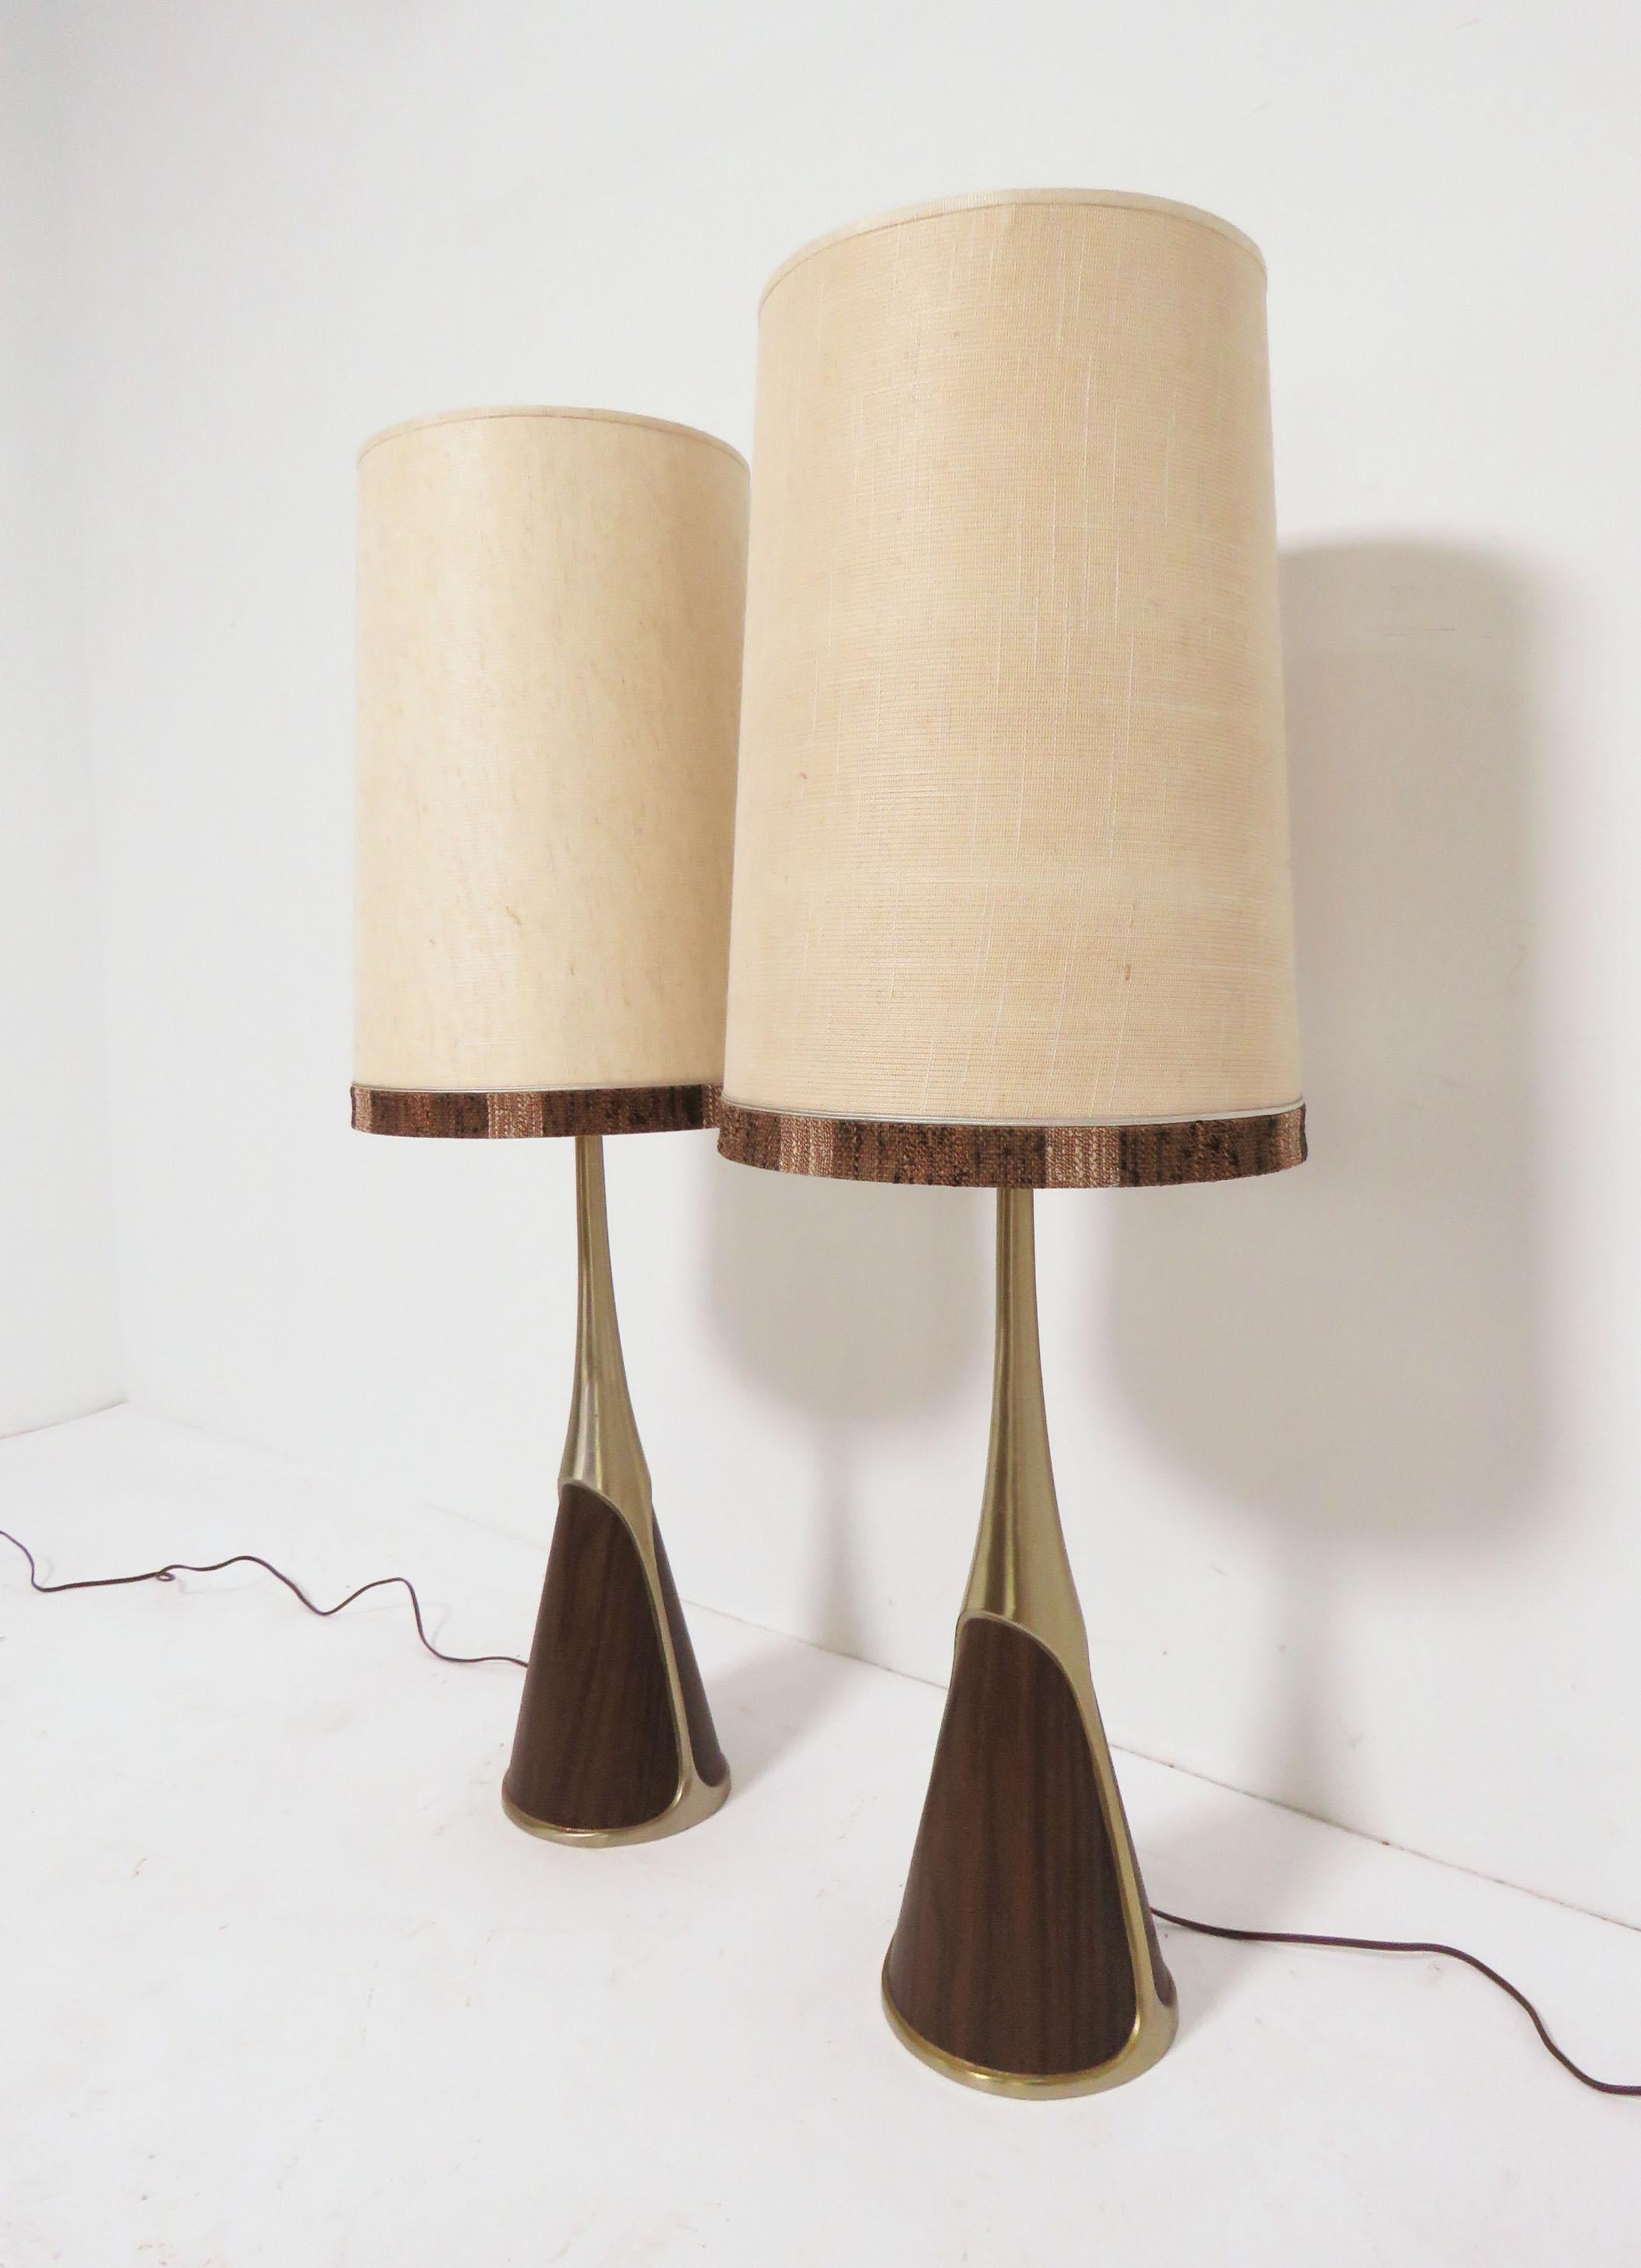 A pair of all original cast metal lamps with panels of teak veneer, circa 1960s by the Laurel Lamp Company. Original period linen shades with hand weave banding are included with these lamps. 

With shades, these measure 40.5